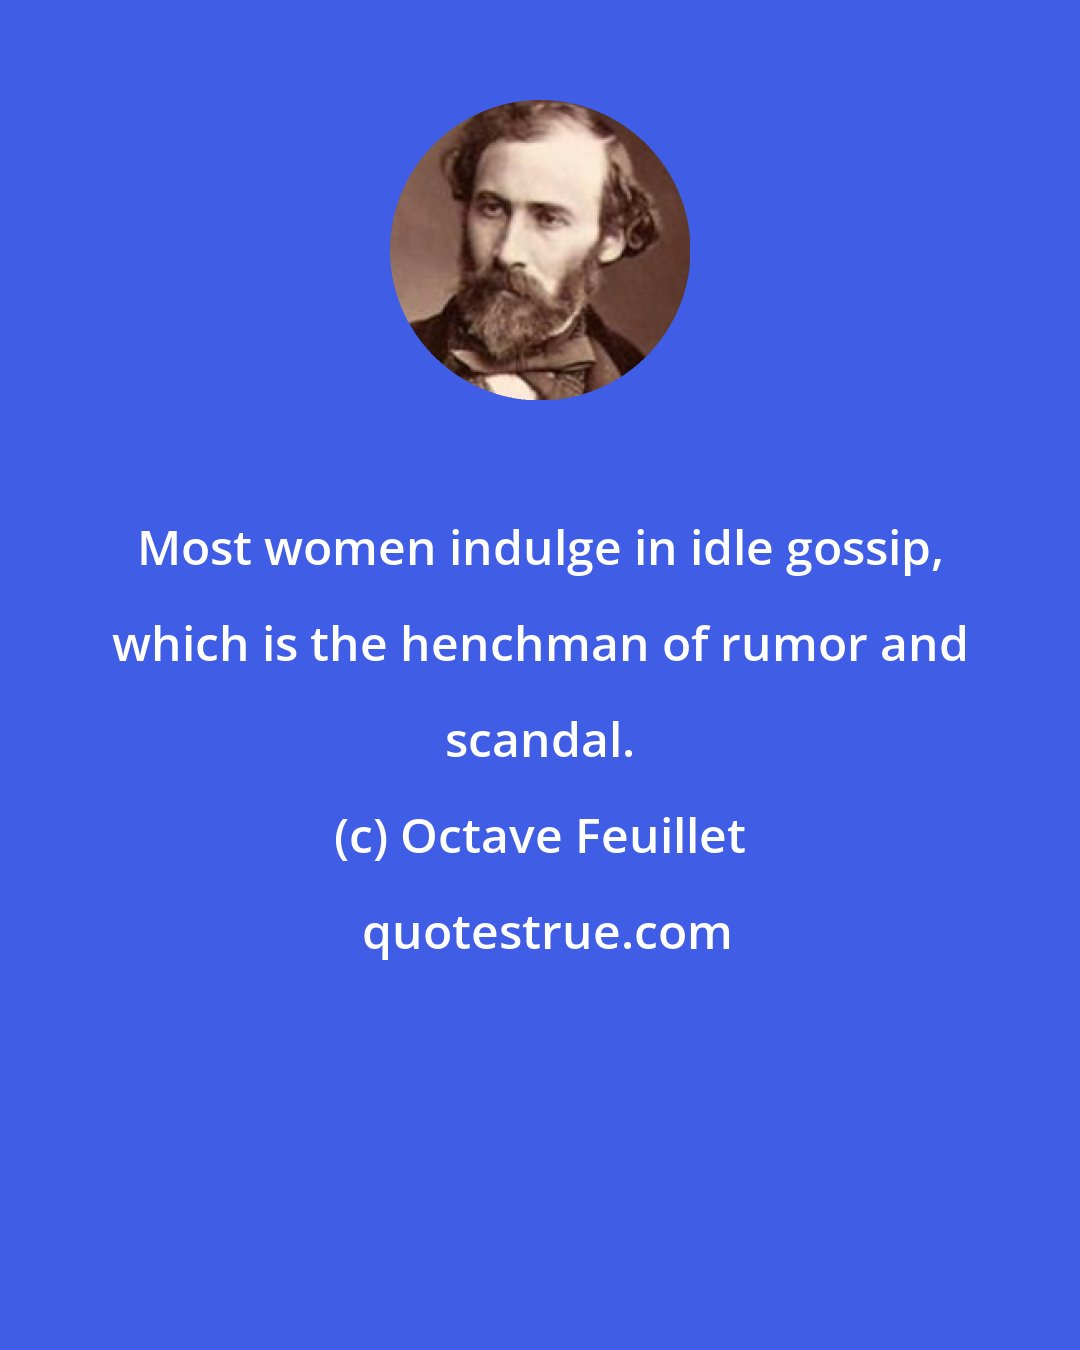 Octave Feuillet: Most women indulge in idle gossip, which is the henchman of rumor and scandal.